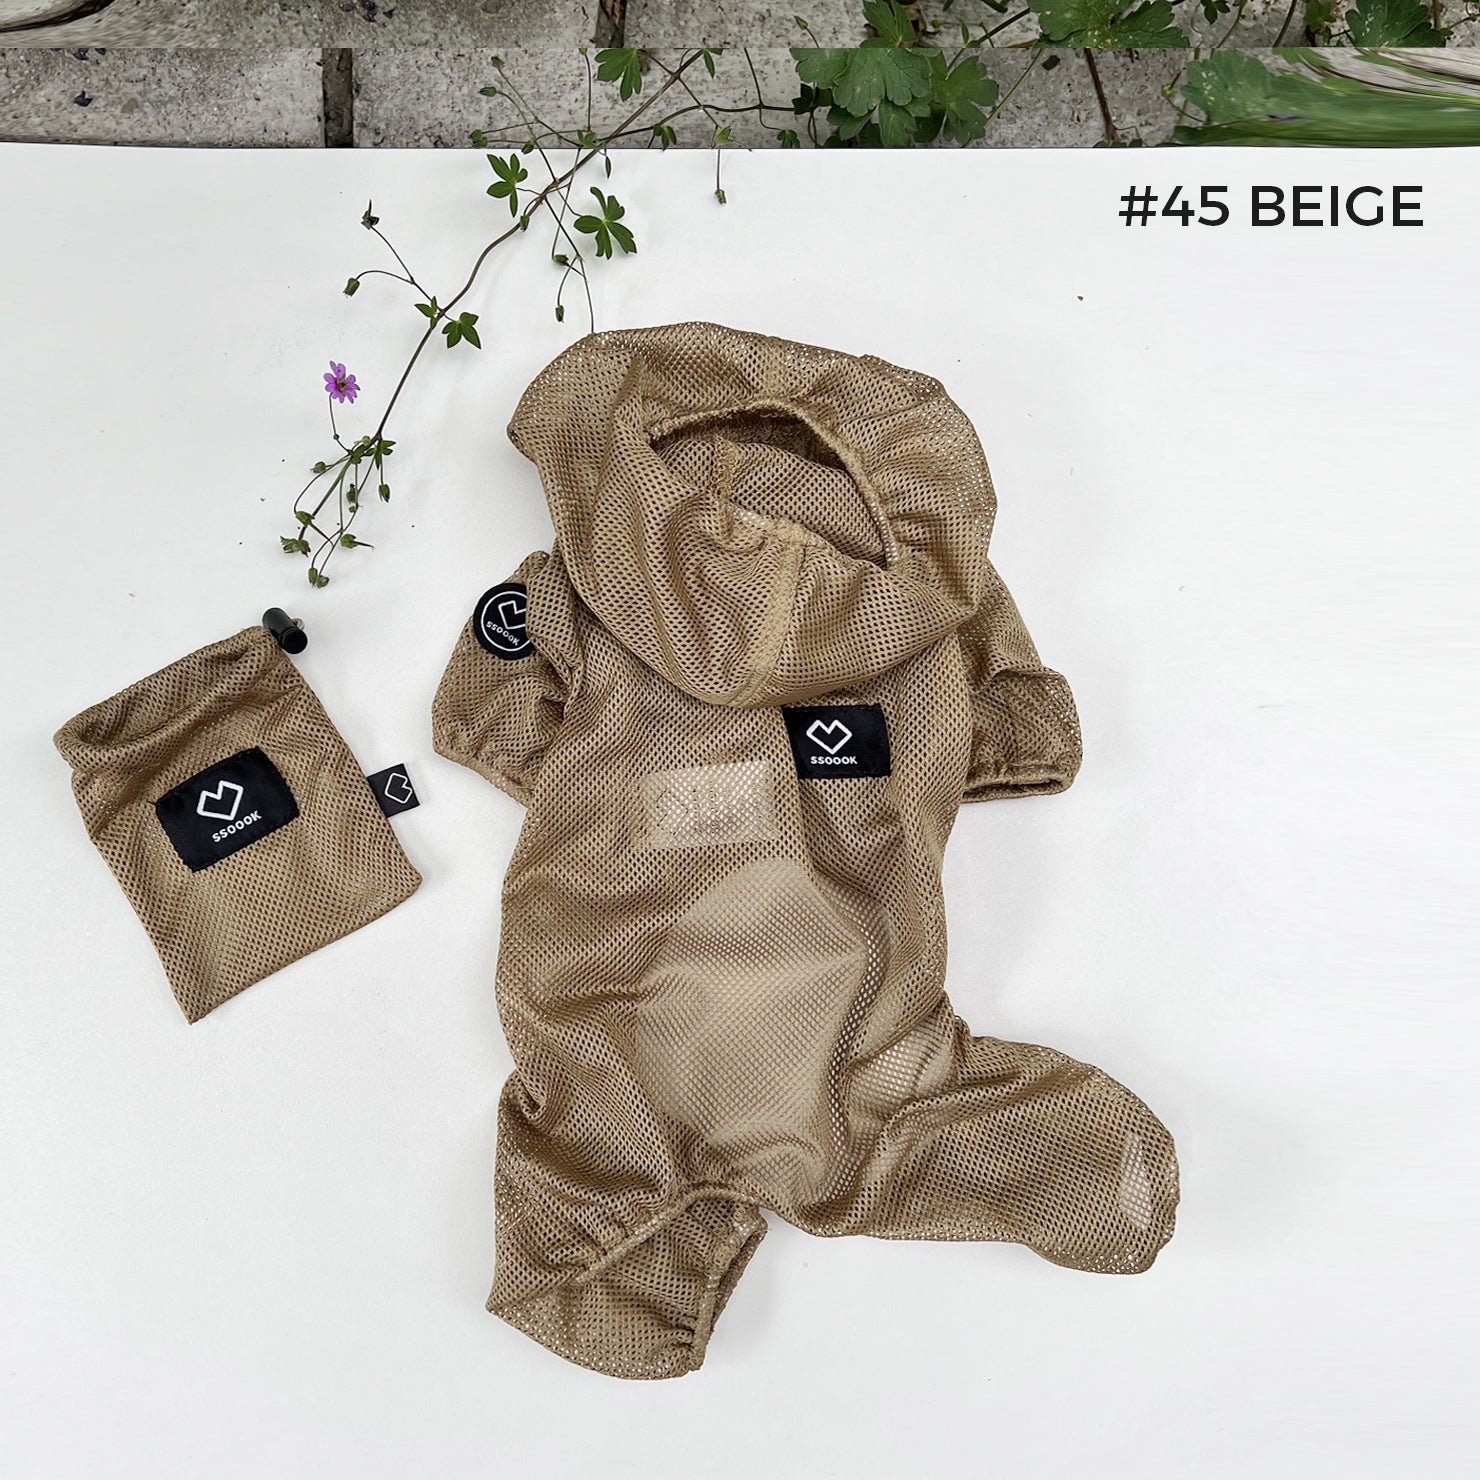 [SO-OR004] SSOOOK Mesh Coveralls